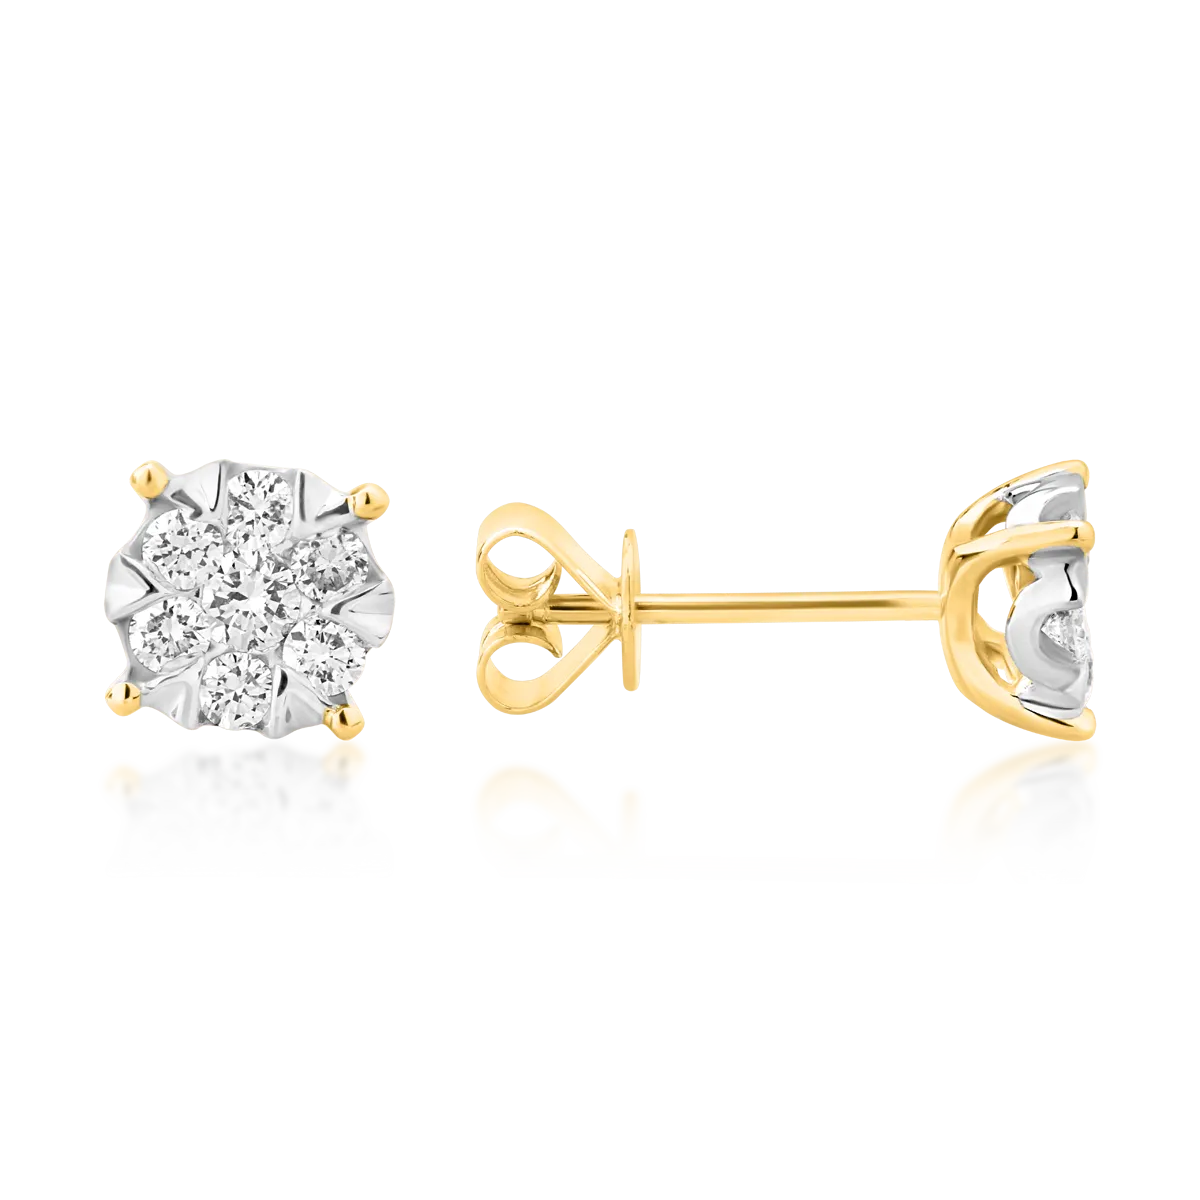 18K white-yellow gold earrings with 0.34ct diamonds